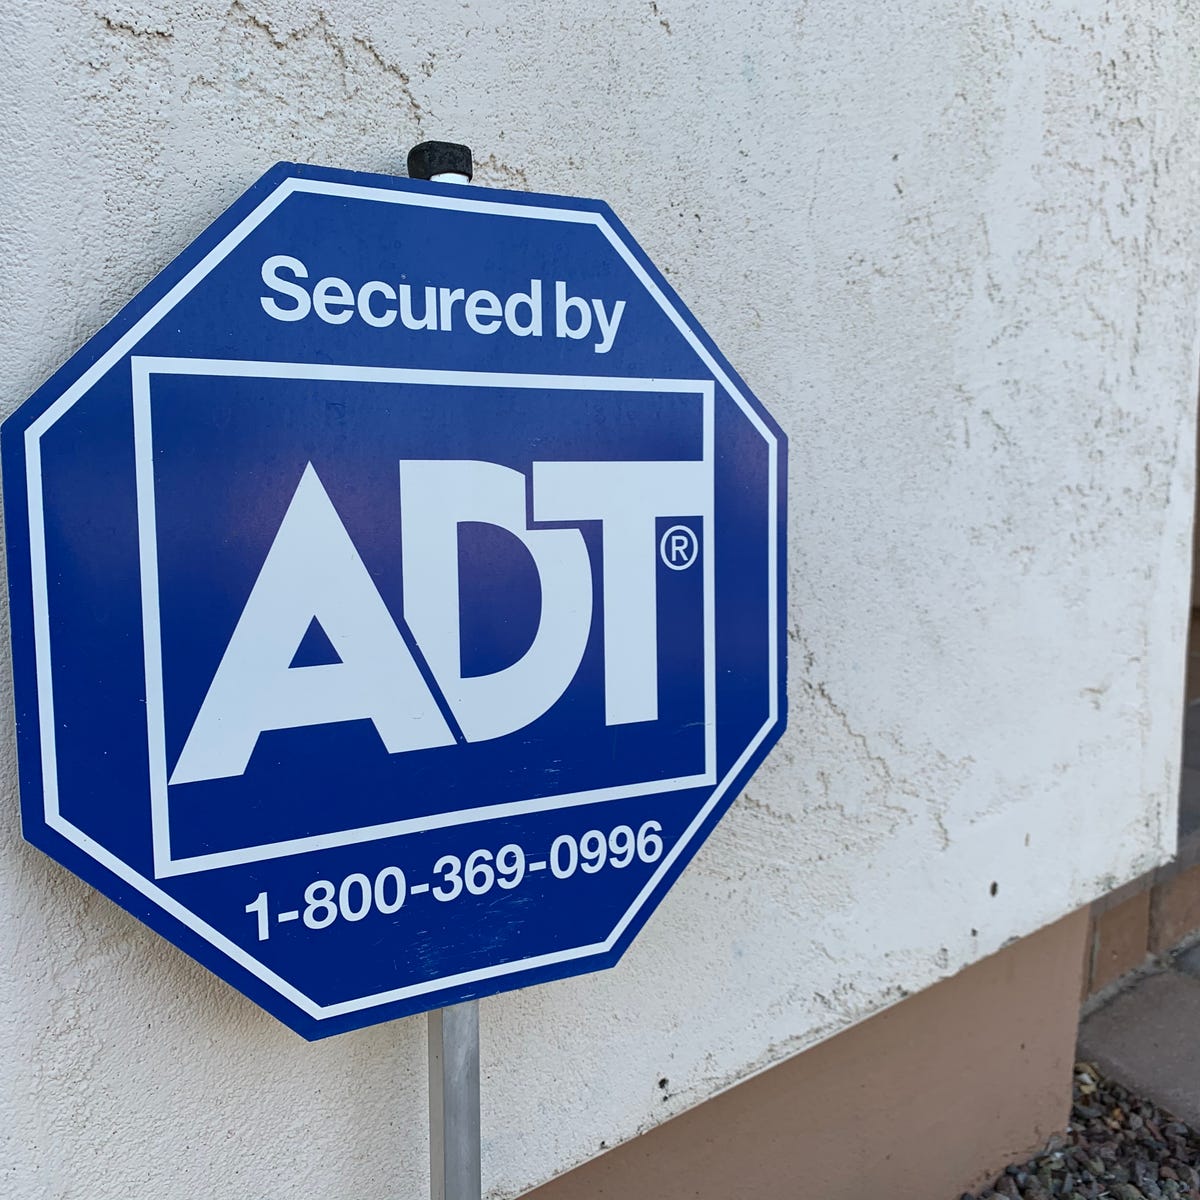 Adt Home Security Review Zdnet